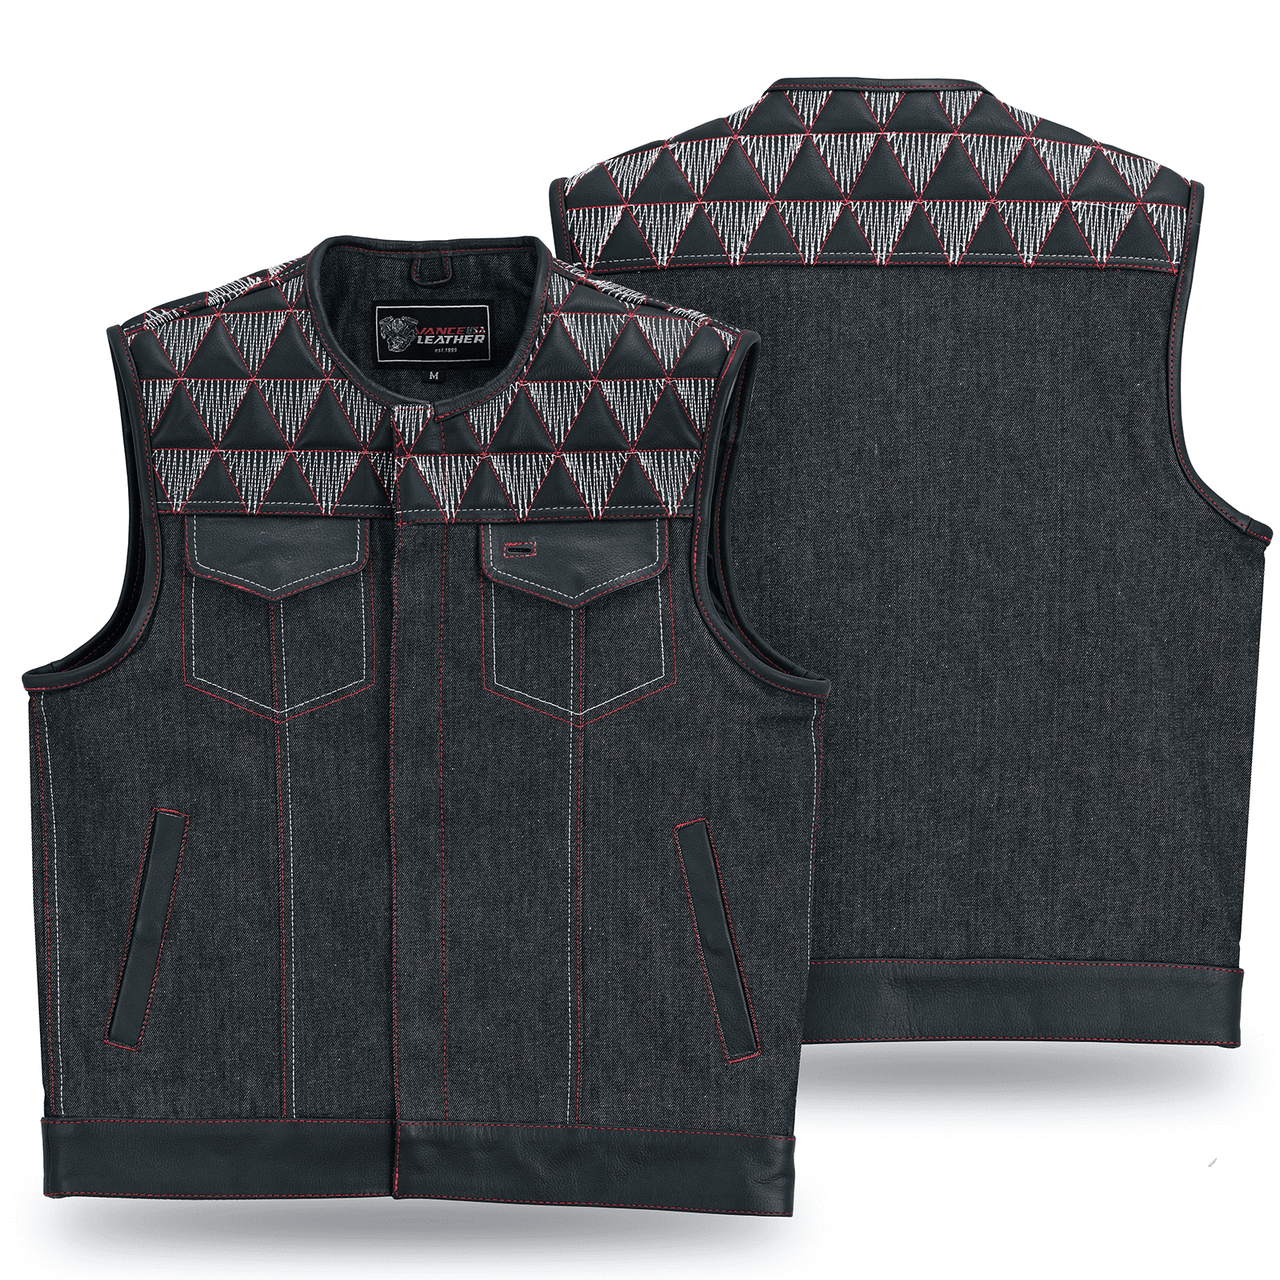 Men's-Denim-Leather-Motorcycle-Vest-with-Conceal-Carry-Pockets-SOA-Biker-Club-Vest-Red-White-Stitching-Front-back-view